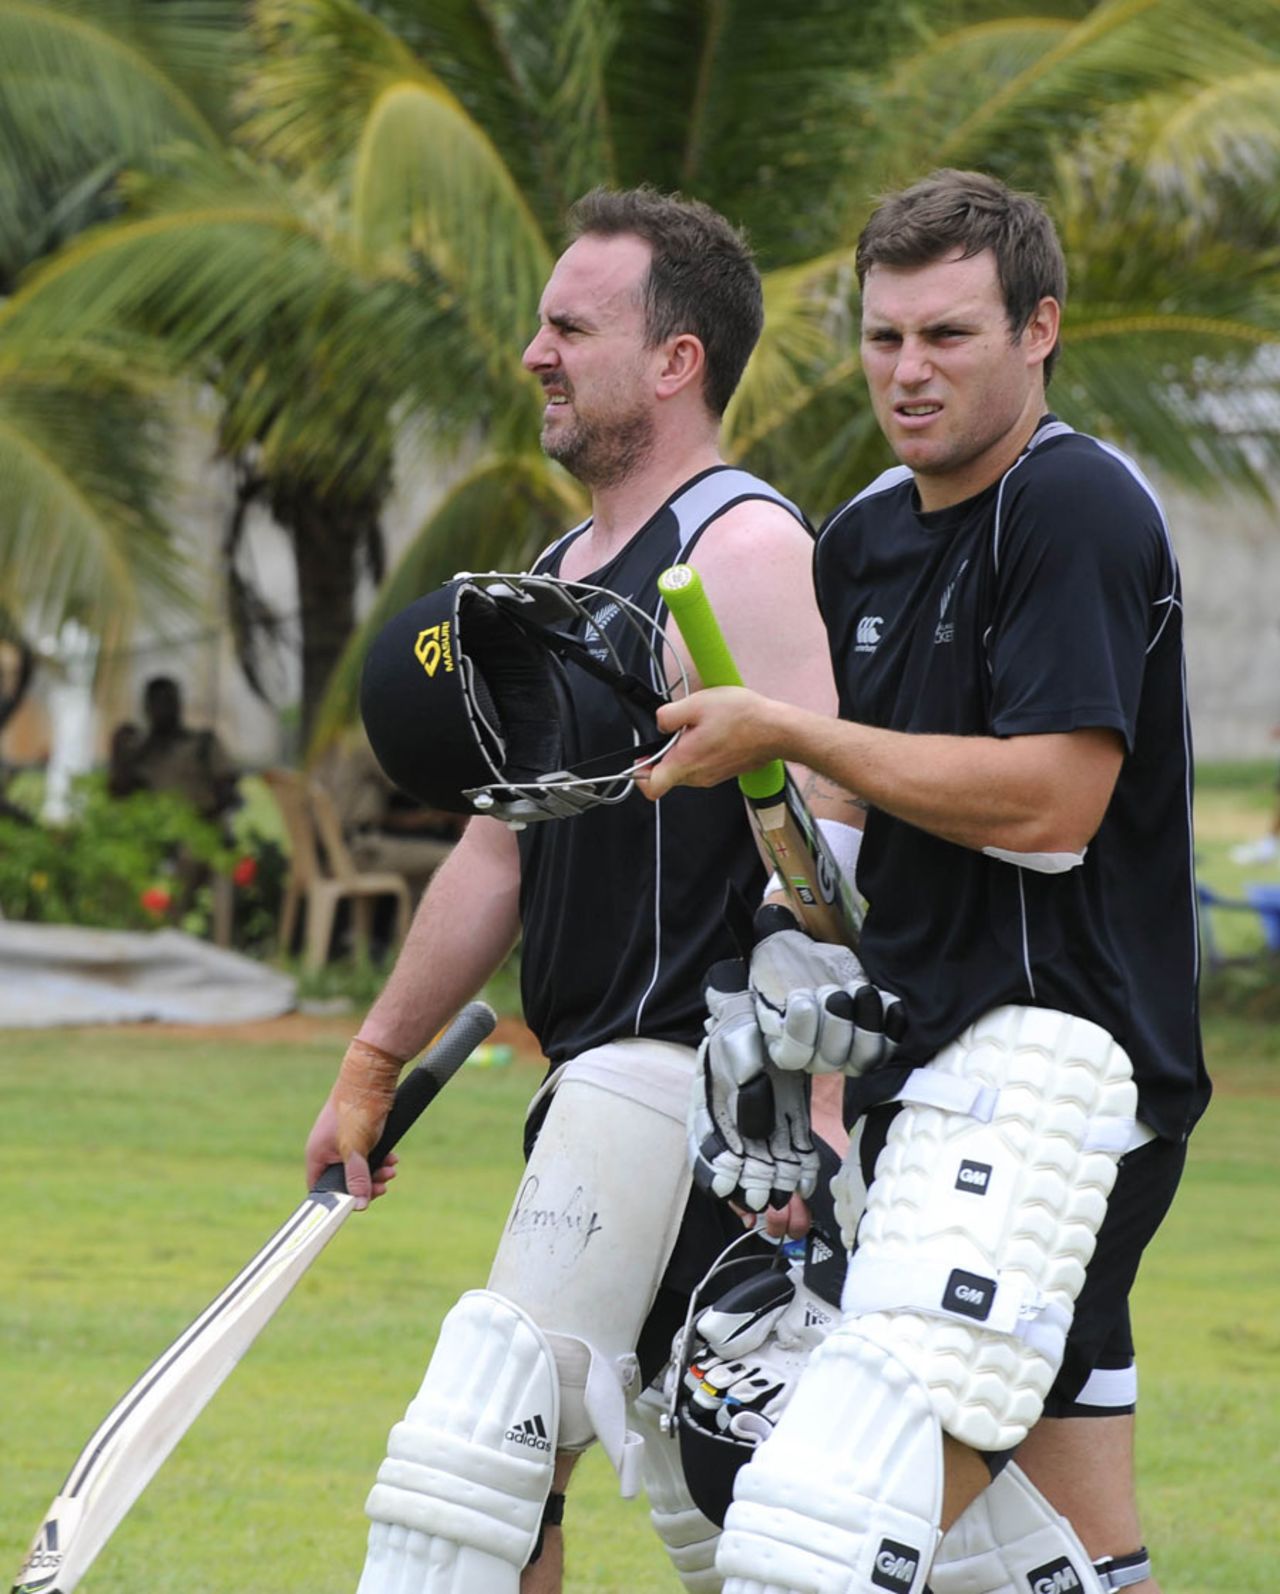 Mark Gillespie and Doug Bracewell walk out to bat at training, Visakhapatnam, August 27, 2013